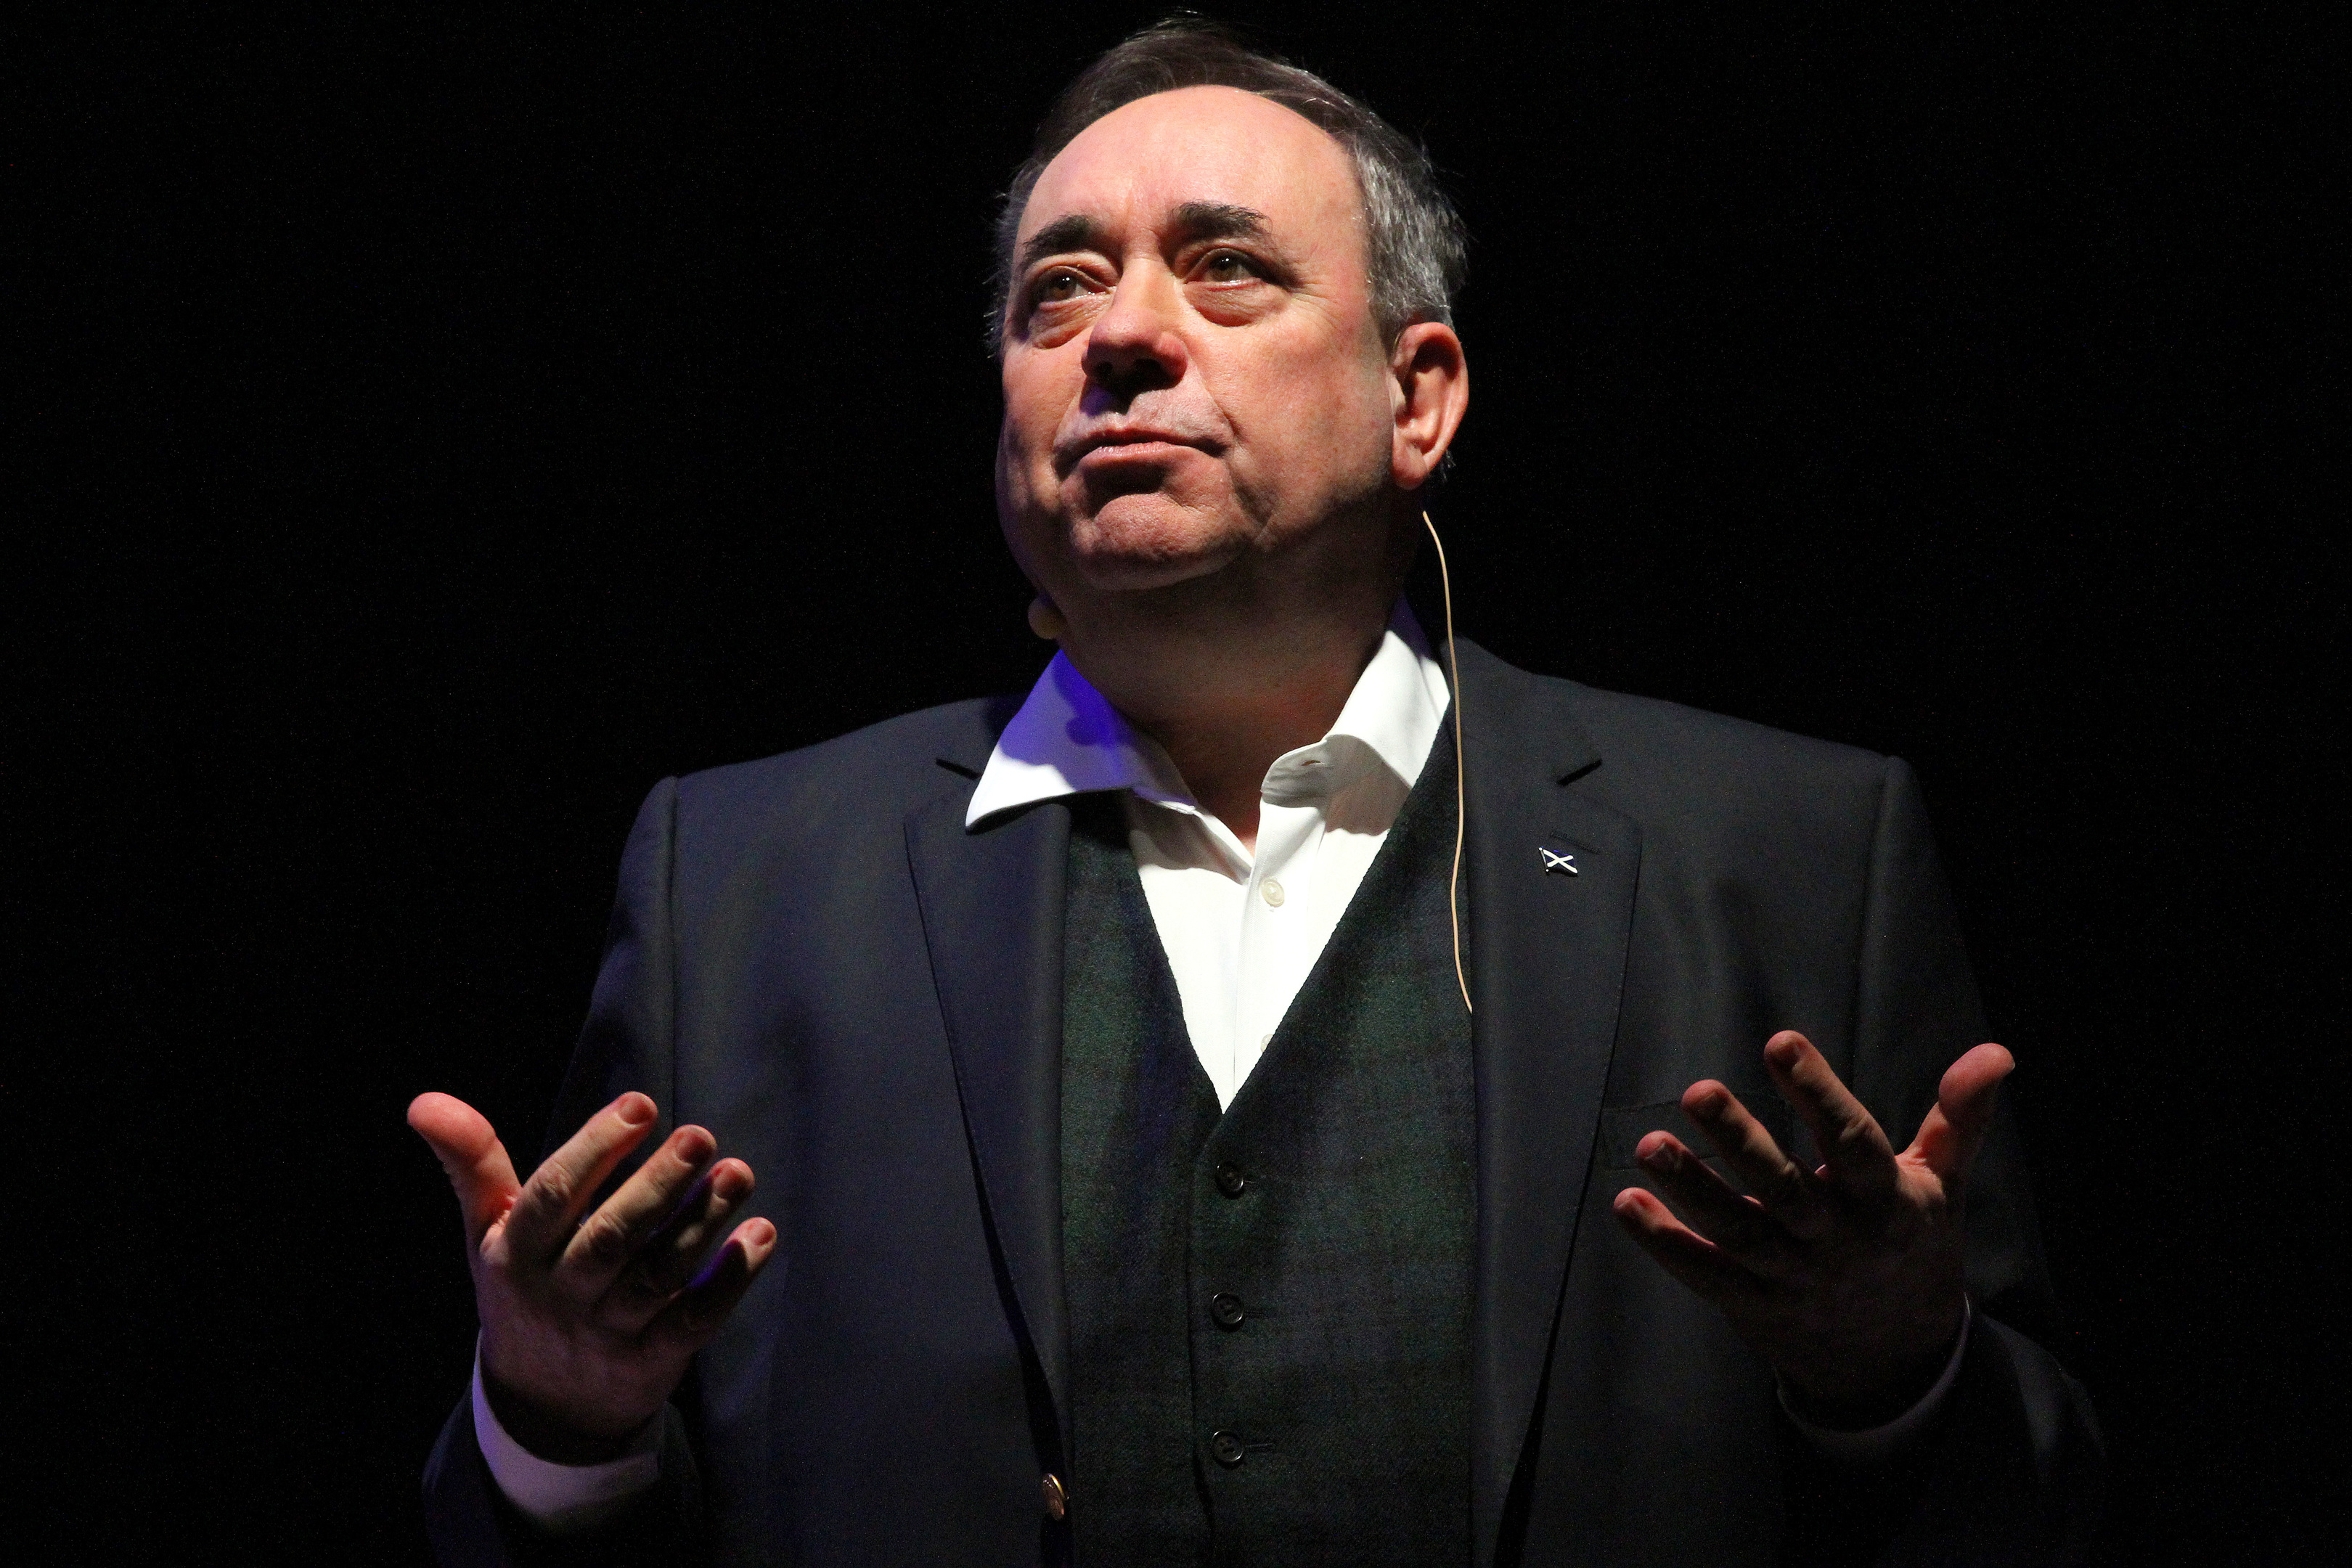 Alex Salmond on stage at the Caird Hall in Dundee.